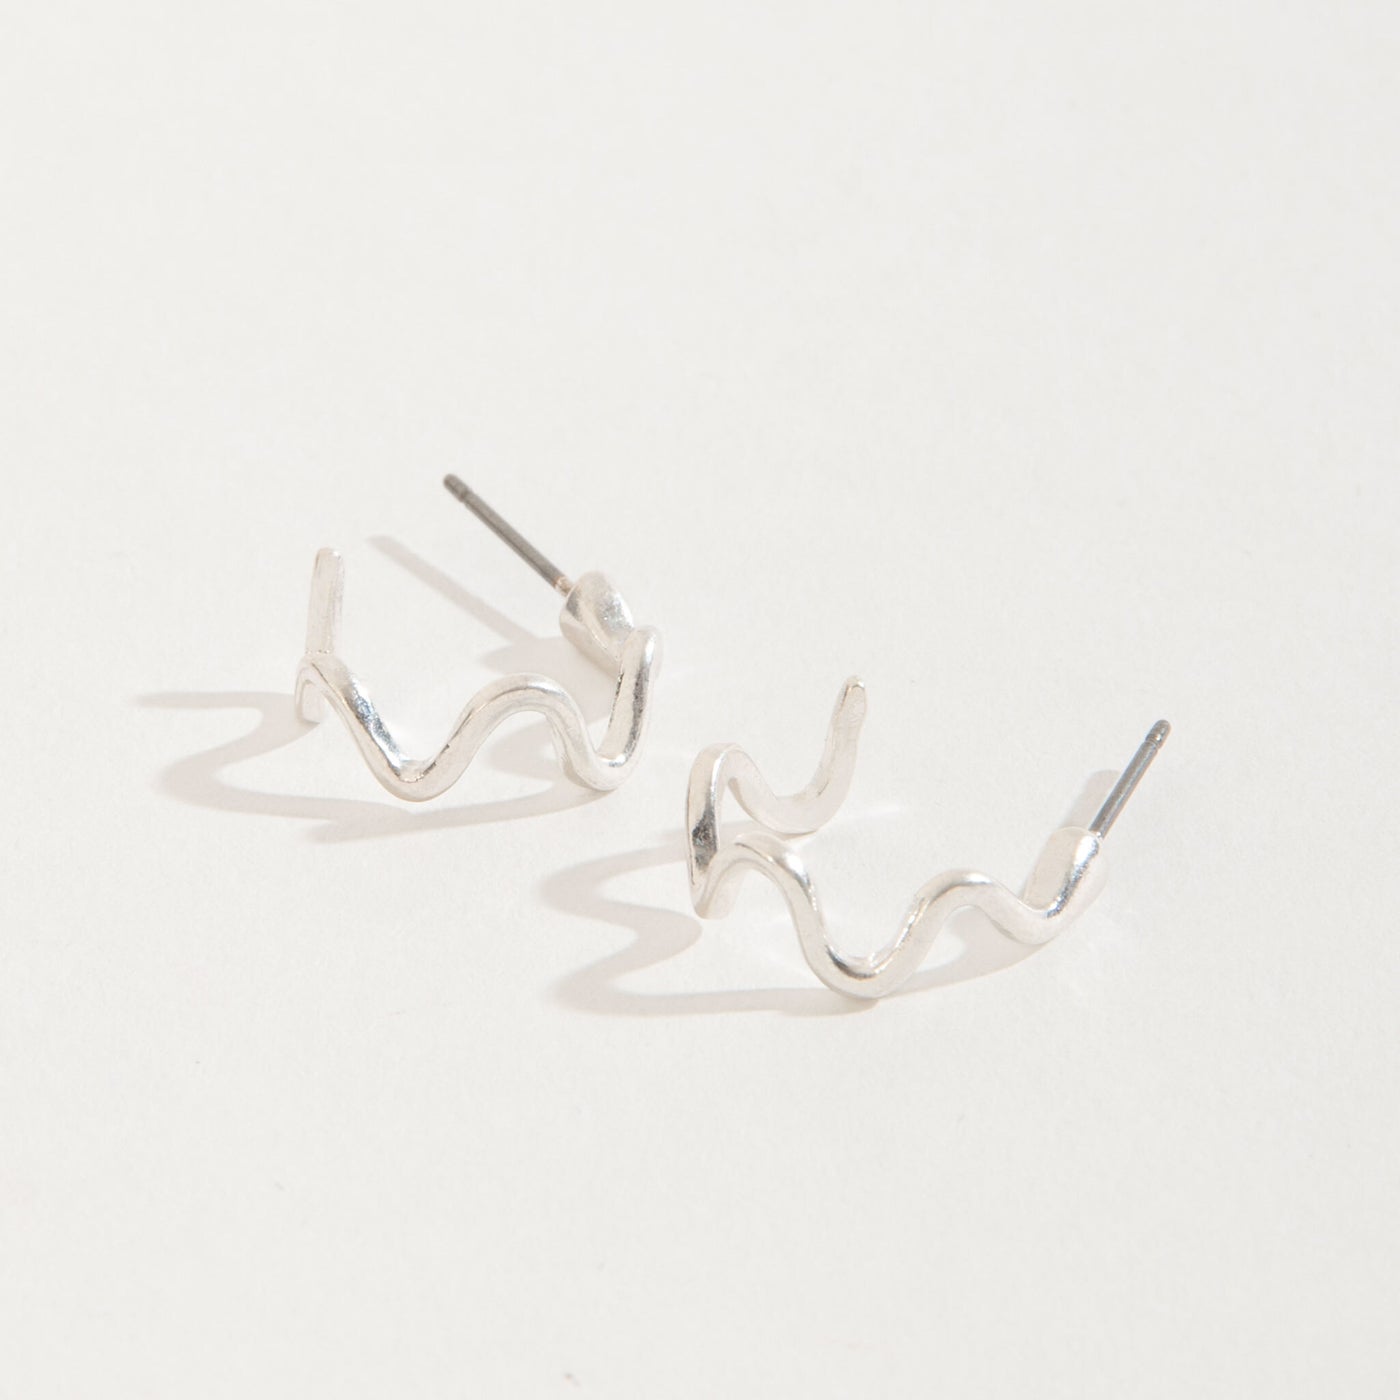 silver wiggle hoop stud earrings on a white background